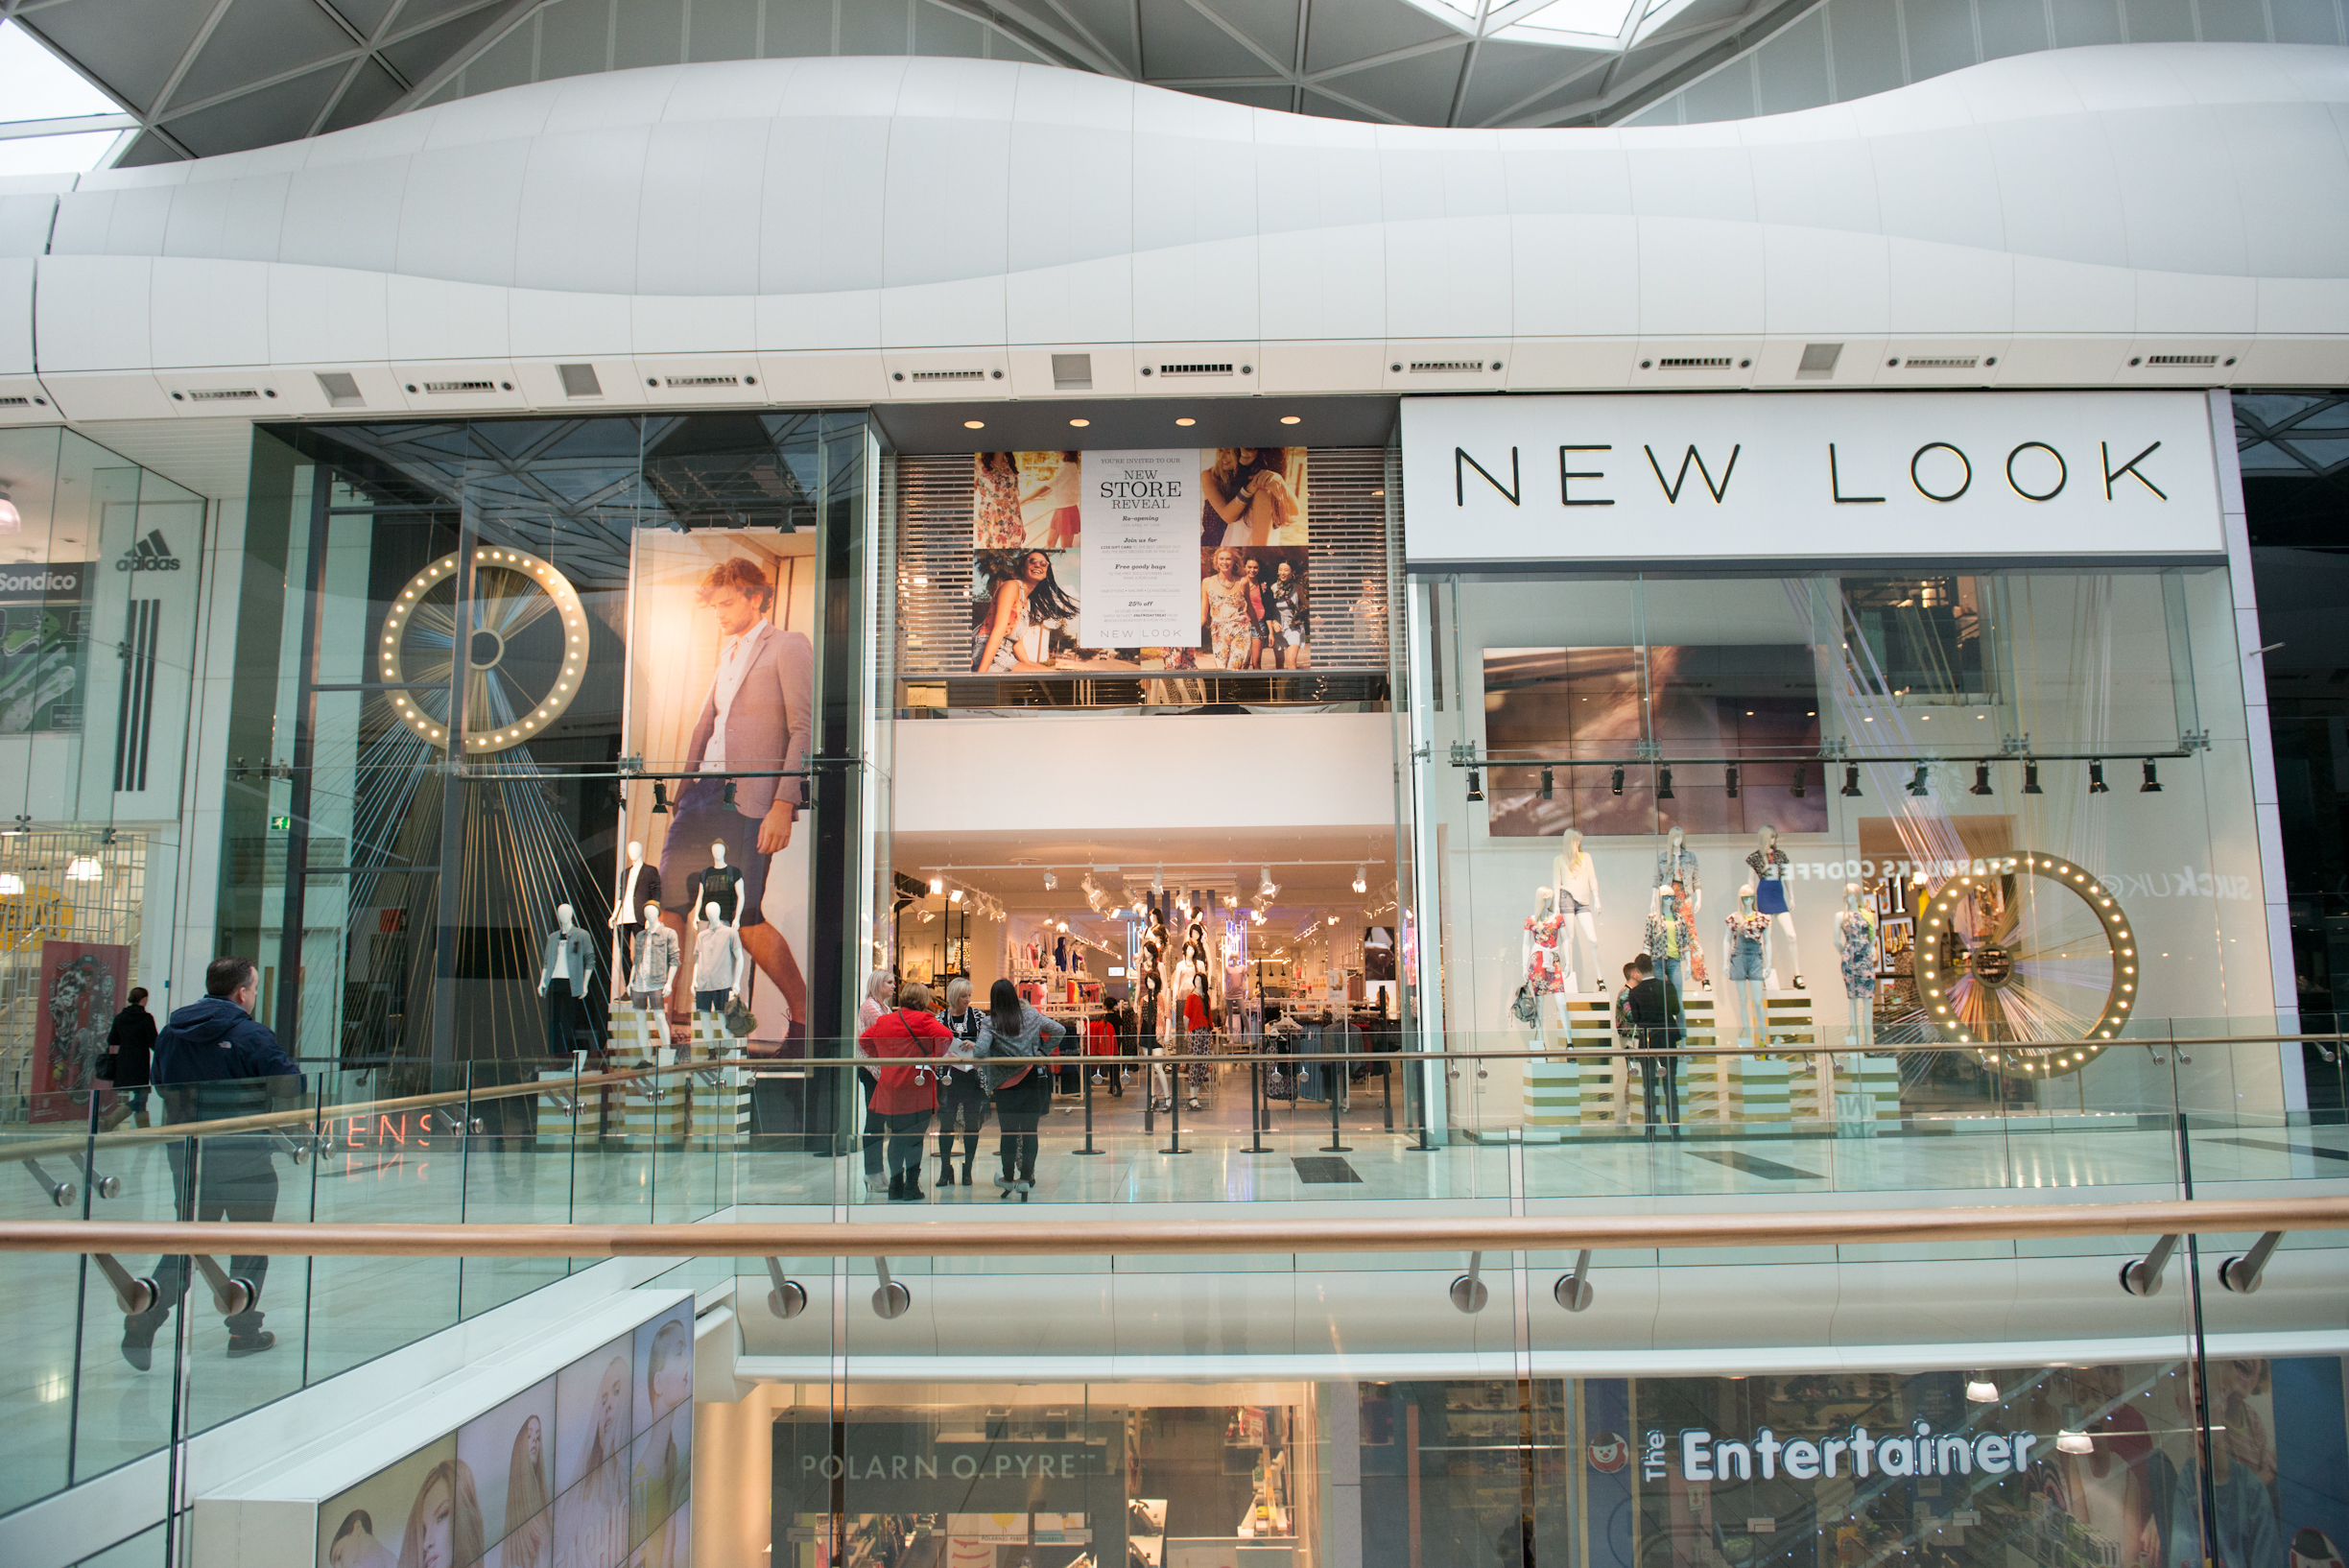 New Look White City | Shopping in White City, London